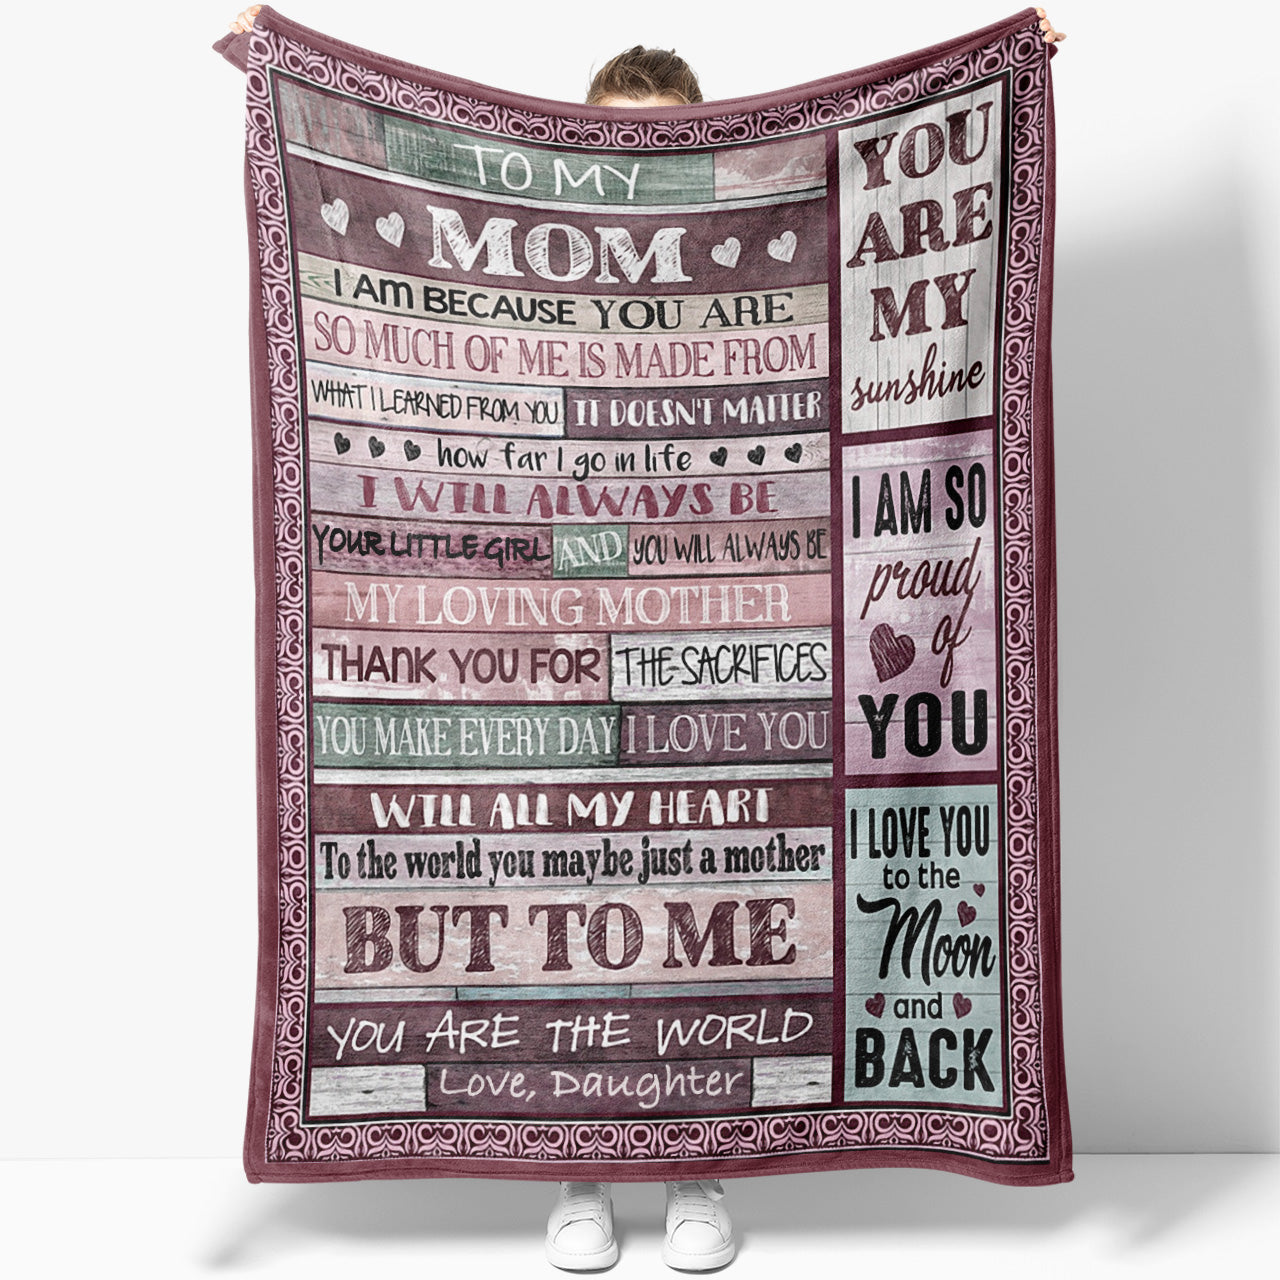 Amazon.com: Christmas Gifts for Mom from Daughter - Mom Christmas Gifts, Mom  Gifts from Daughter - Birthday Gifts for Mom, Mom Birthday Gifts, Great Mother  Gifts, Best Mom Ever Gifts, Present for